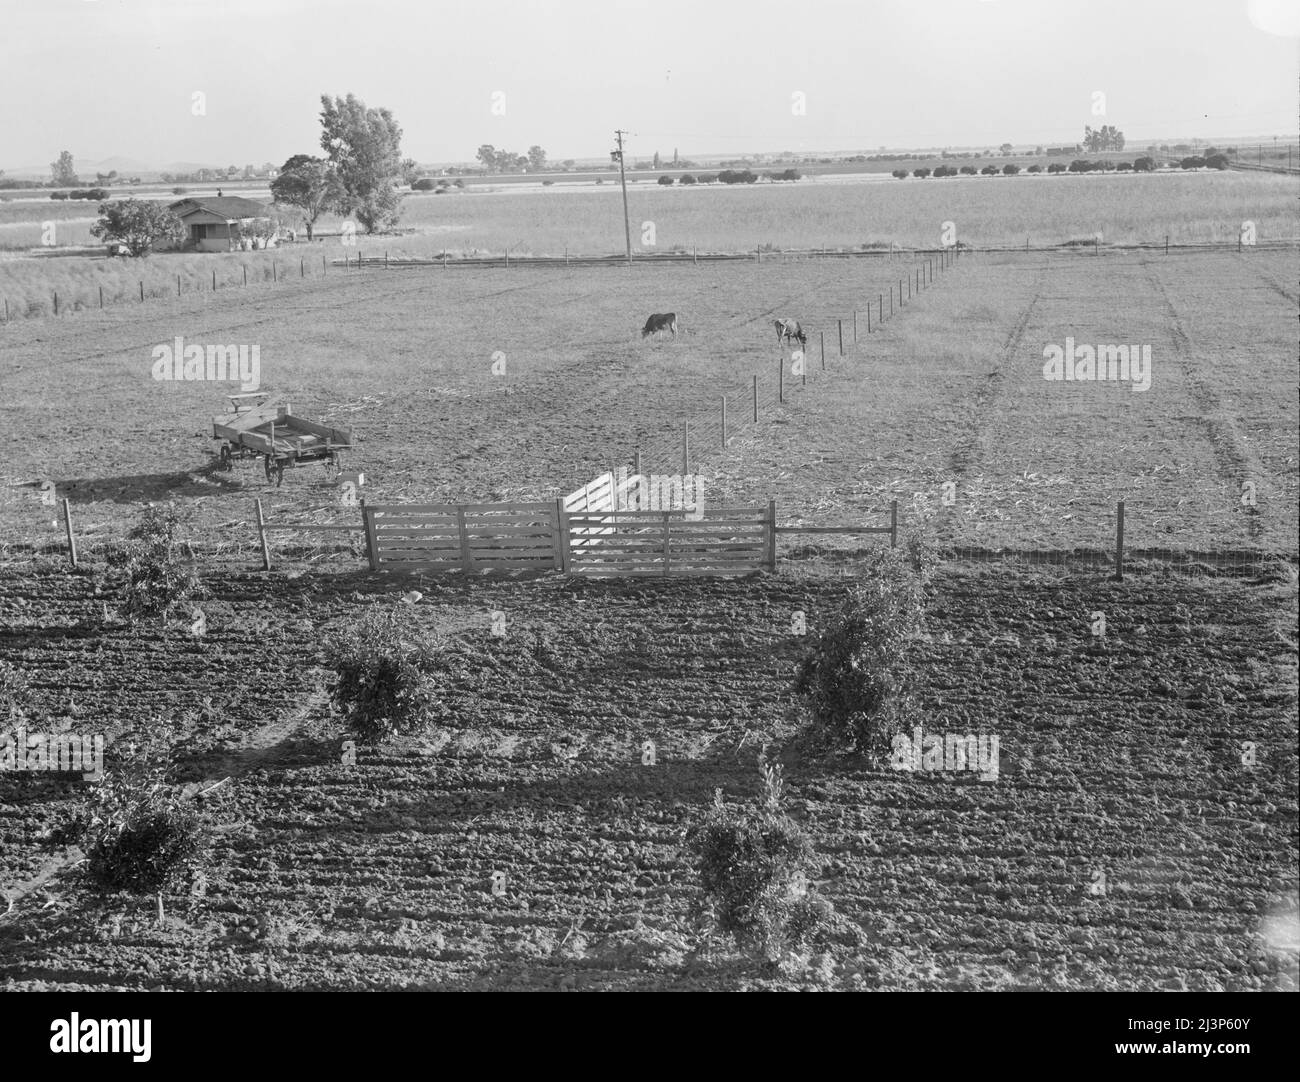 Rural rehabilitation, Tulare County, California. Productive dairy farm replaces unsuccessful fruit orchard. Family had been on relief. They were reestablished by a plan of farm operation which involved removing the trees for permanent cow pasture, and cash loan of money necessary for new start (Farm Security Administration-FSA). Stock Photo